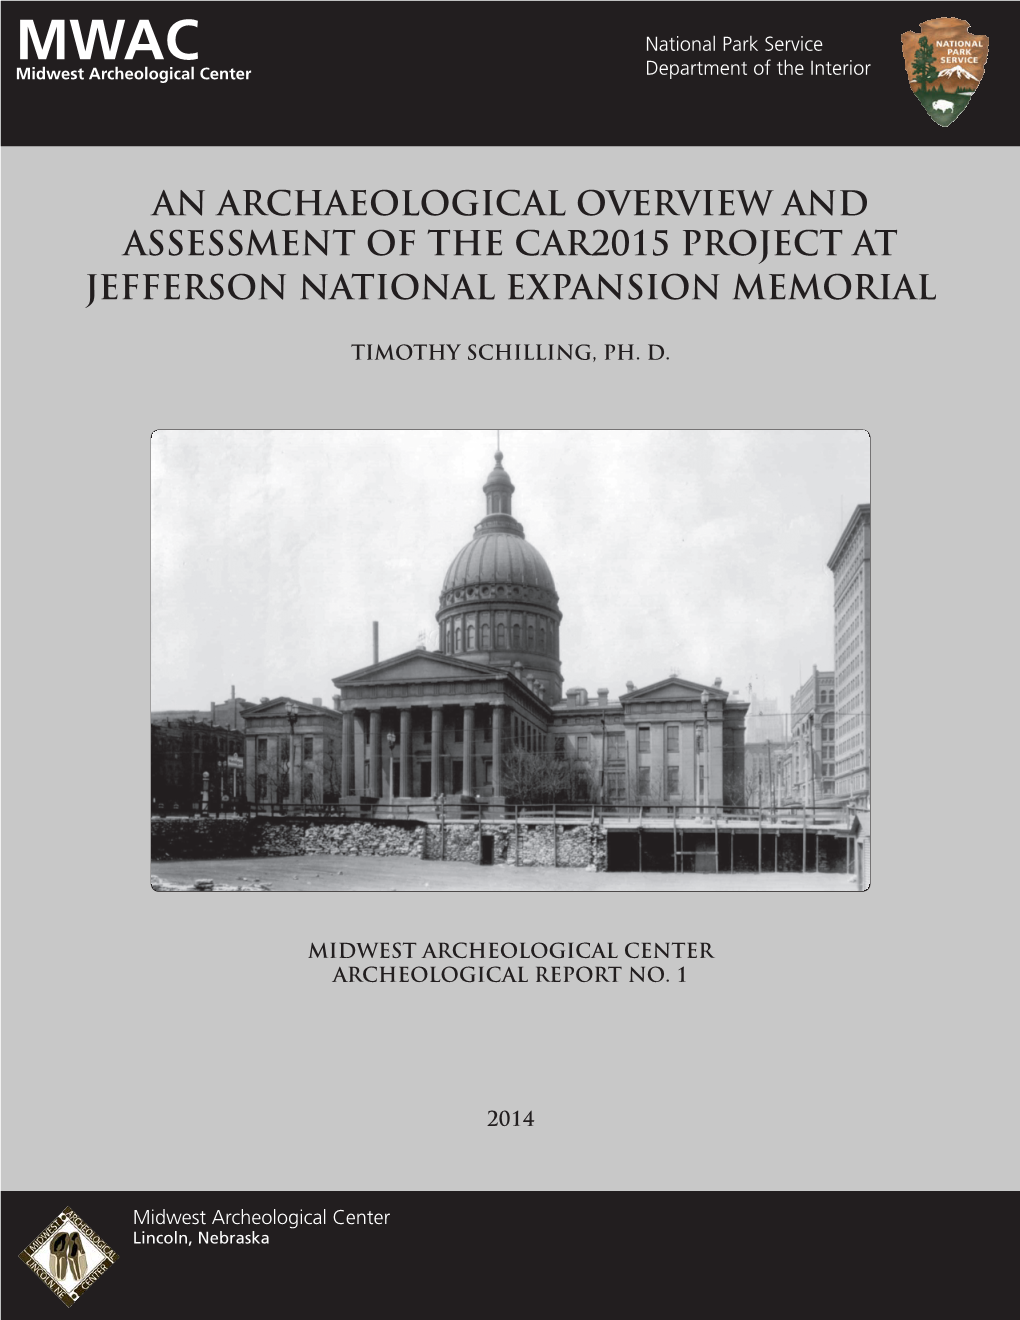 An Archaeological Overview and Assessment of the Car2015 Project at Jefferson National Expansion Memorial